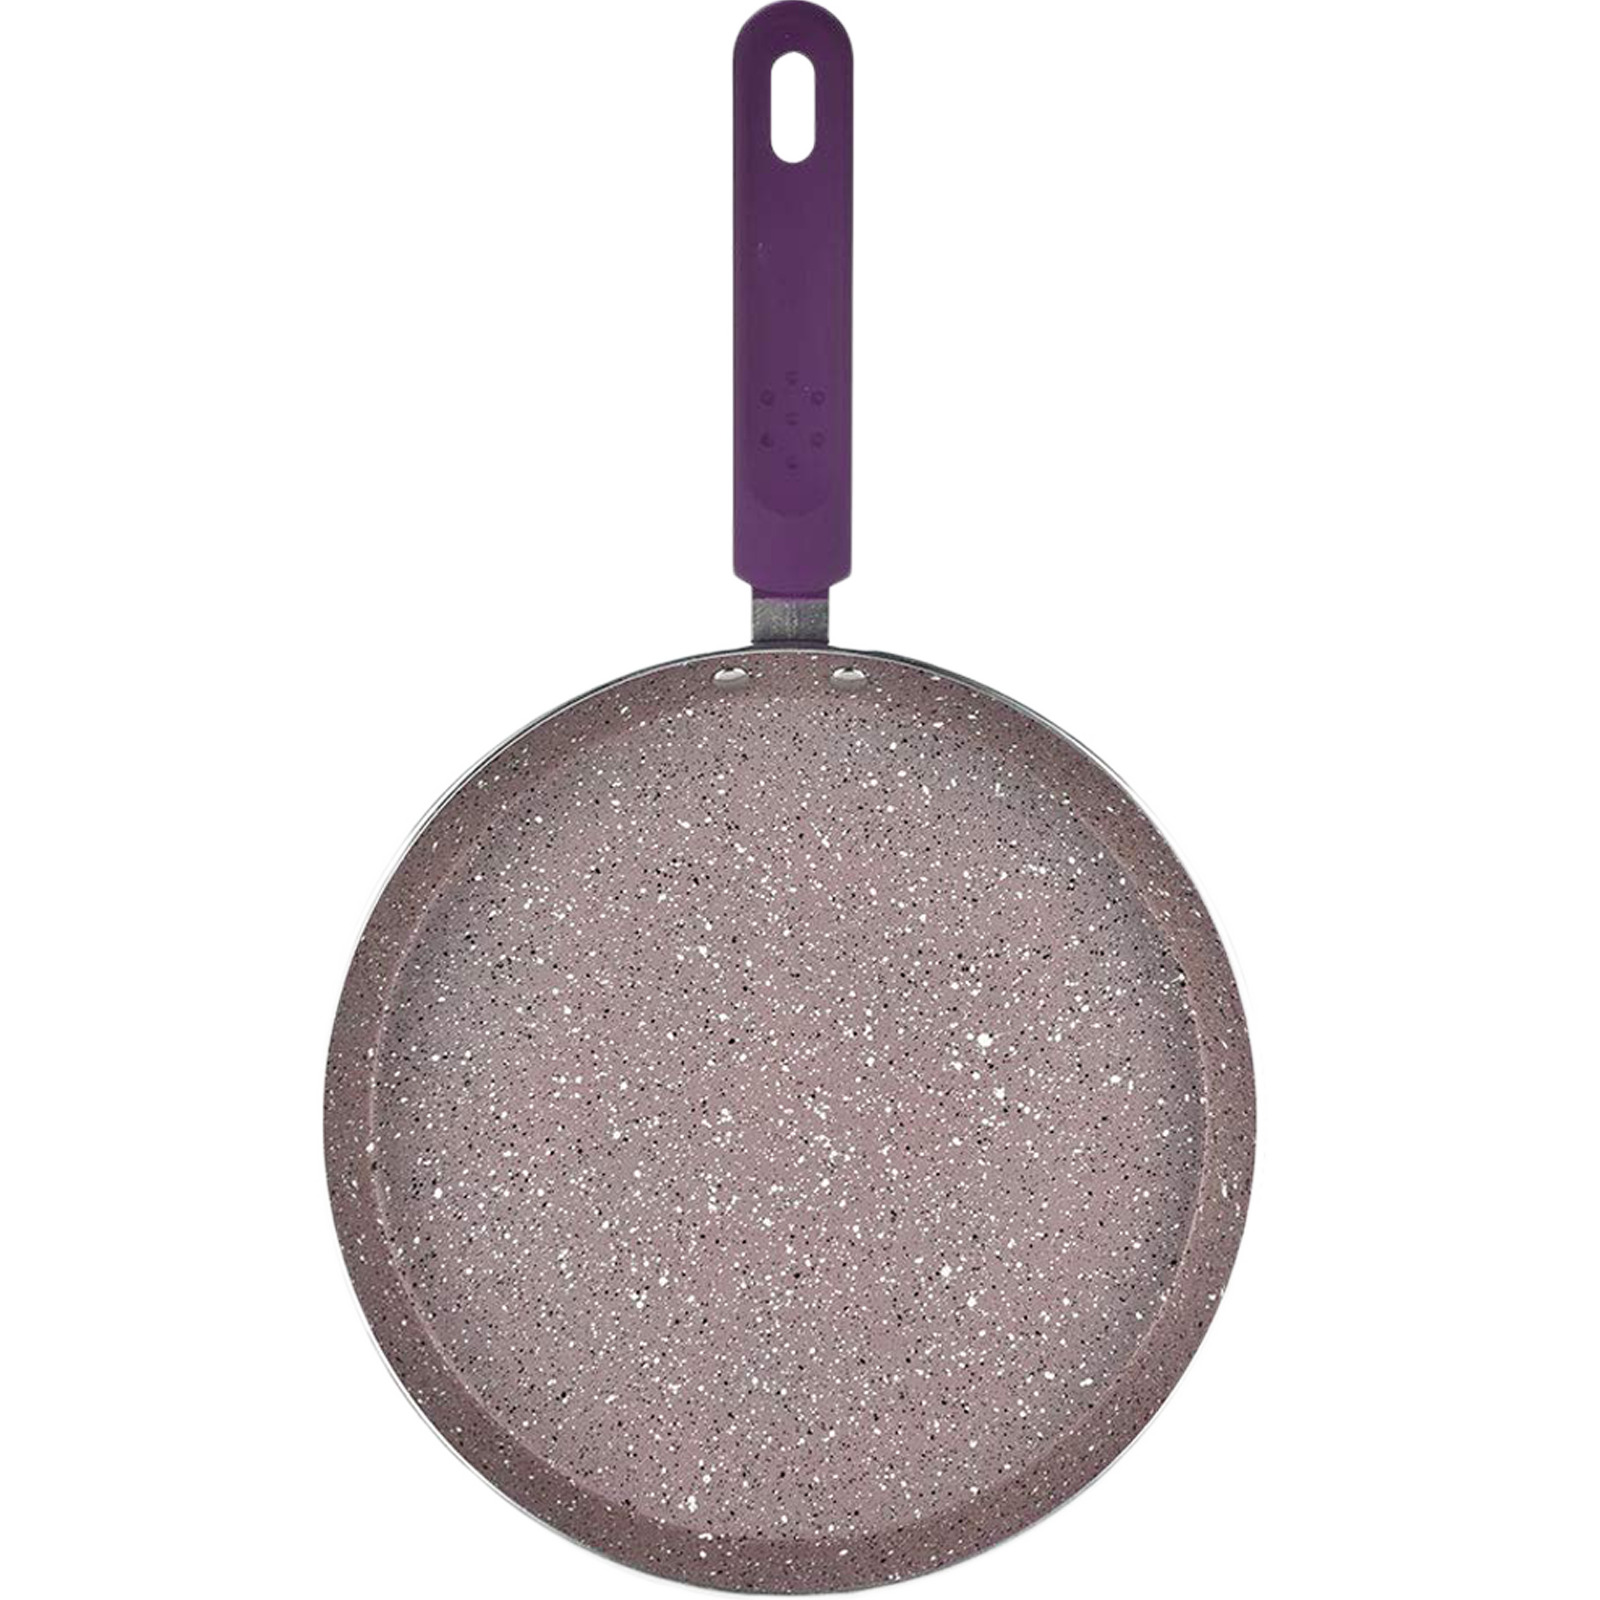 Wonderchef Royal Velvet Dosa Tawa For Induction, Induction Plate, Stoves & Cooktops (Non-Stick Coating, 63152941, Purple)_1